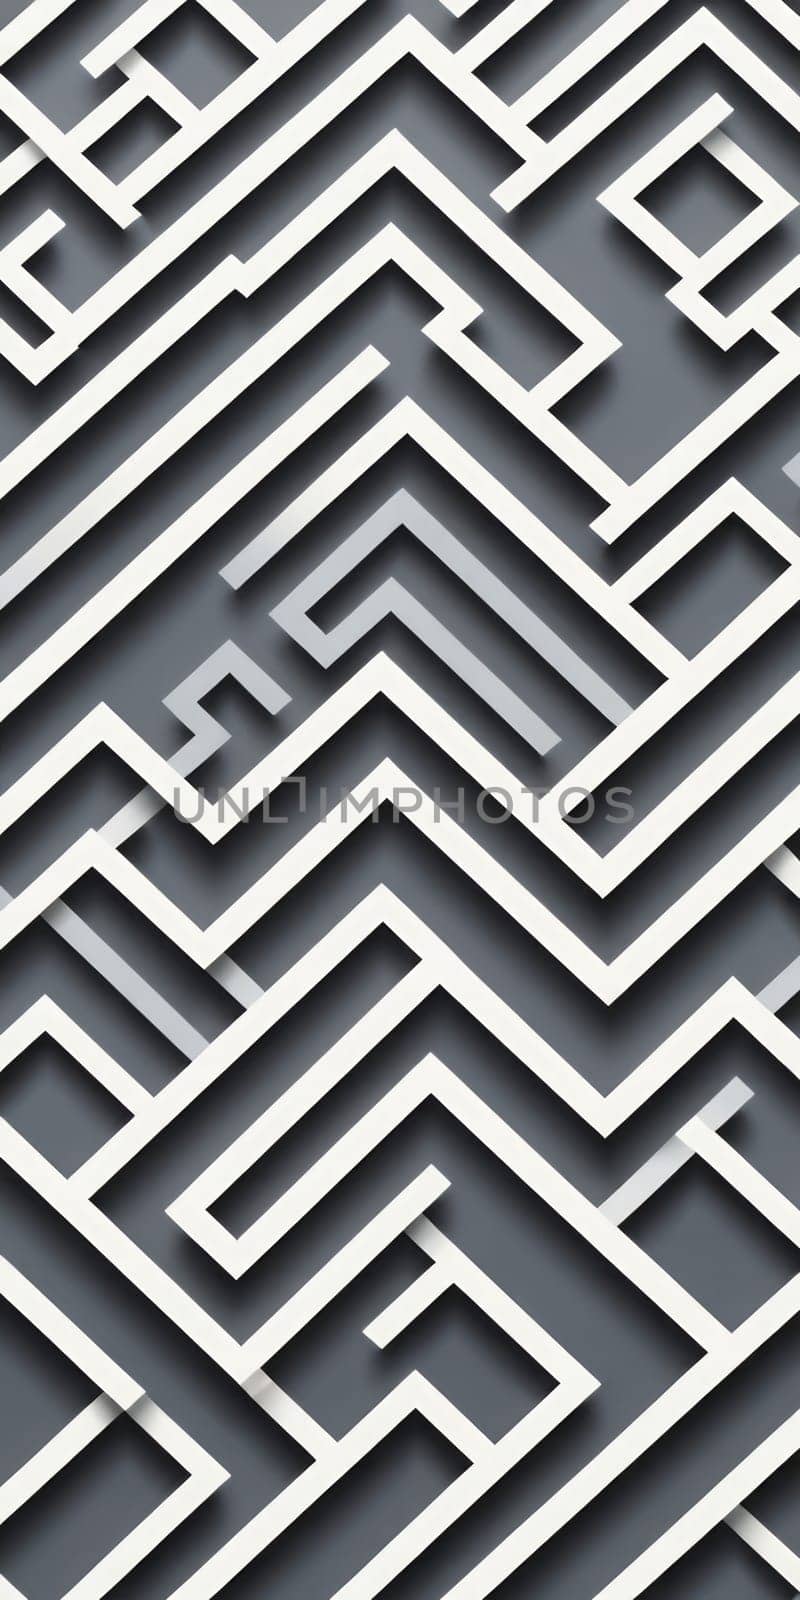 Labyrinth Shapes in Gray and White by nkotlyar